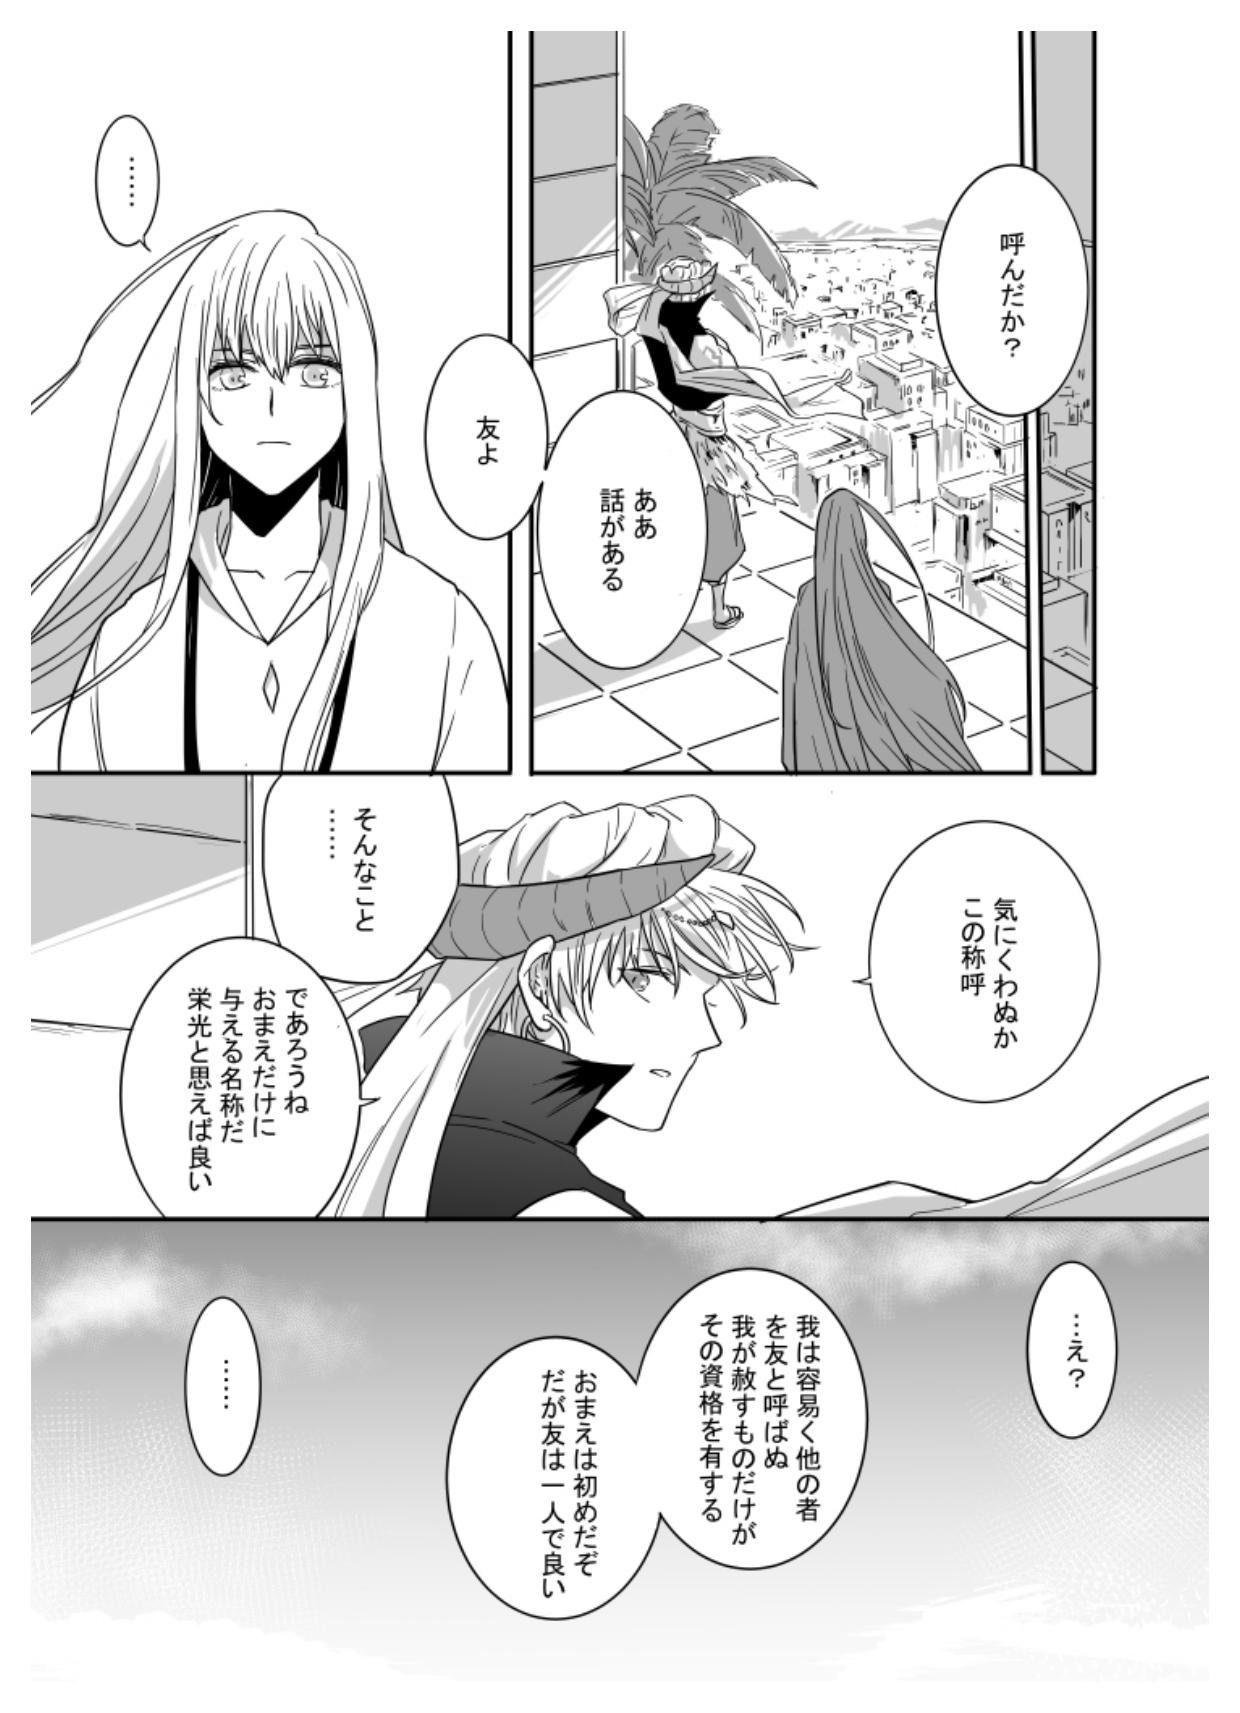 Girl Girl If I have soul - Fate grand order Unshaved - Page 11